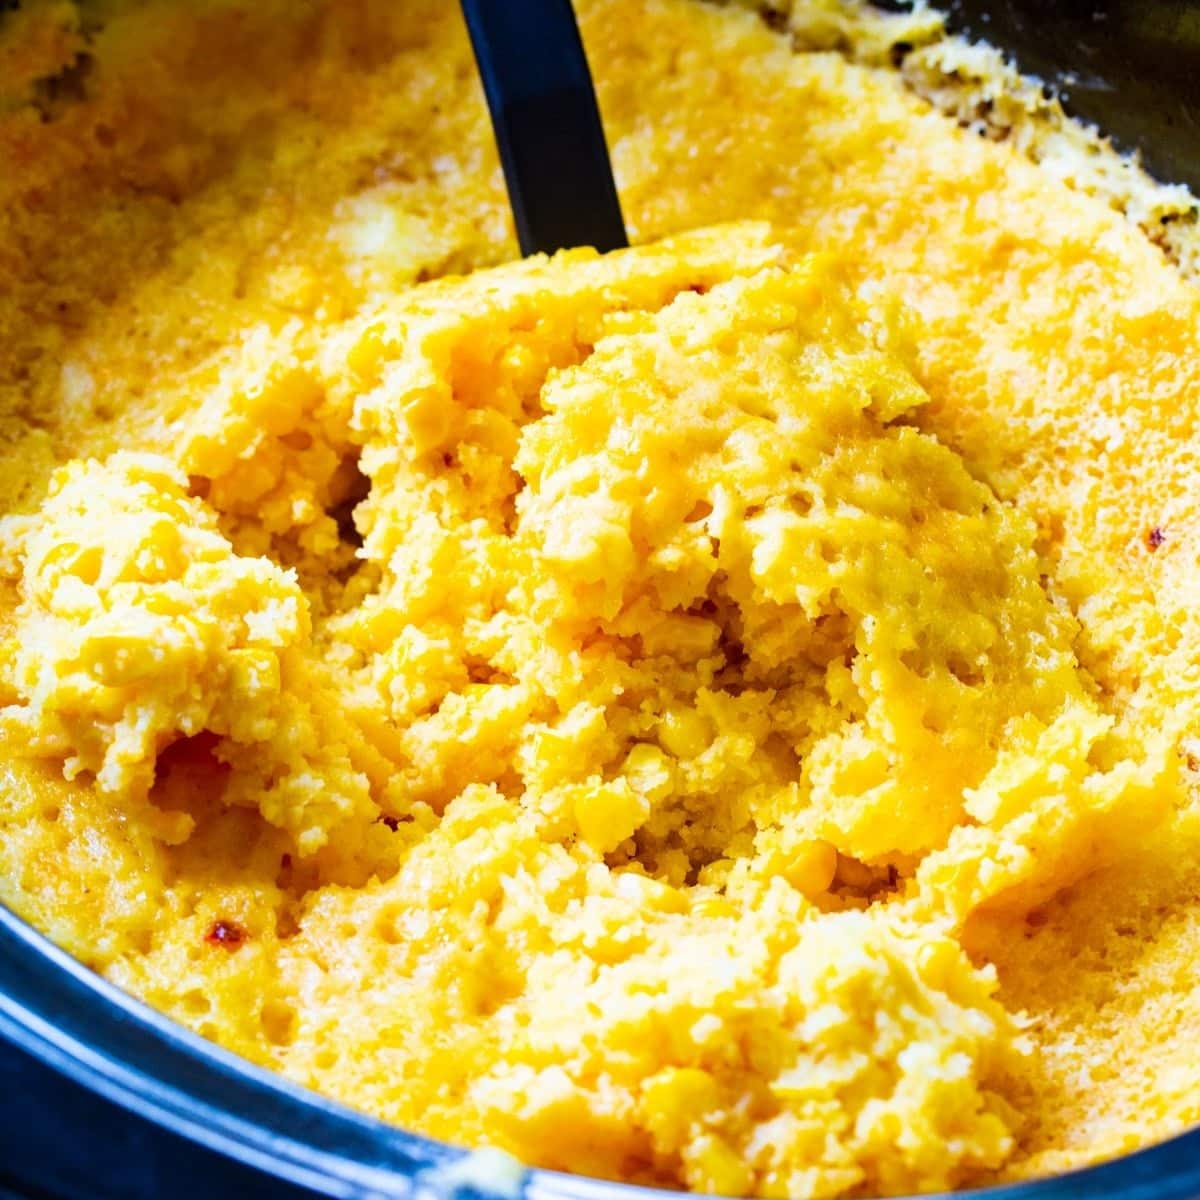 Corn casserole tossed in a slow cooker.